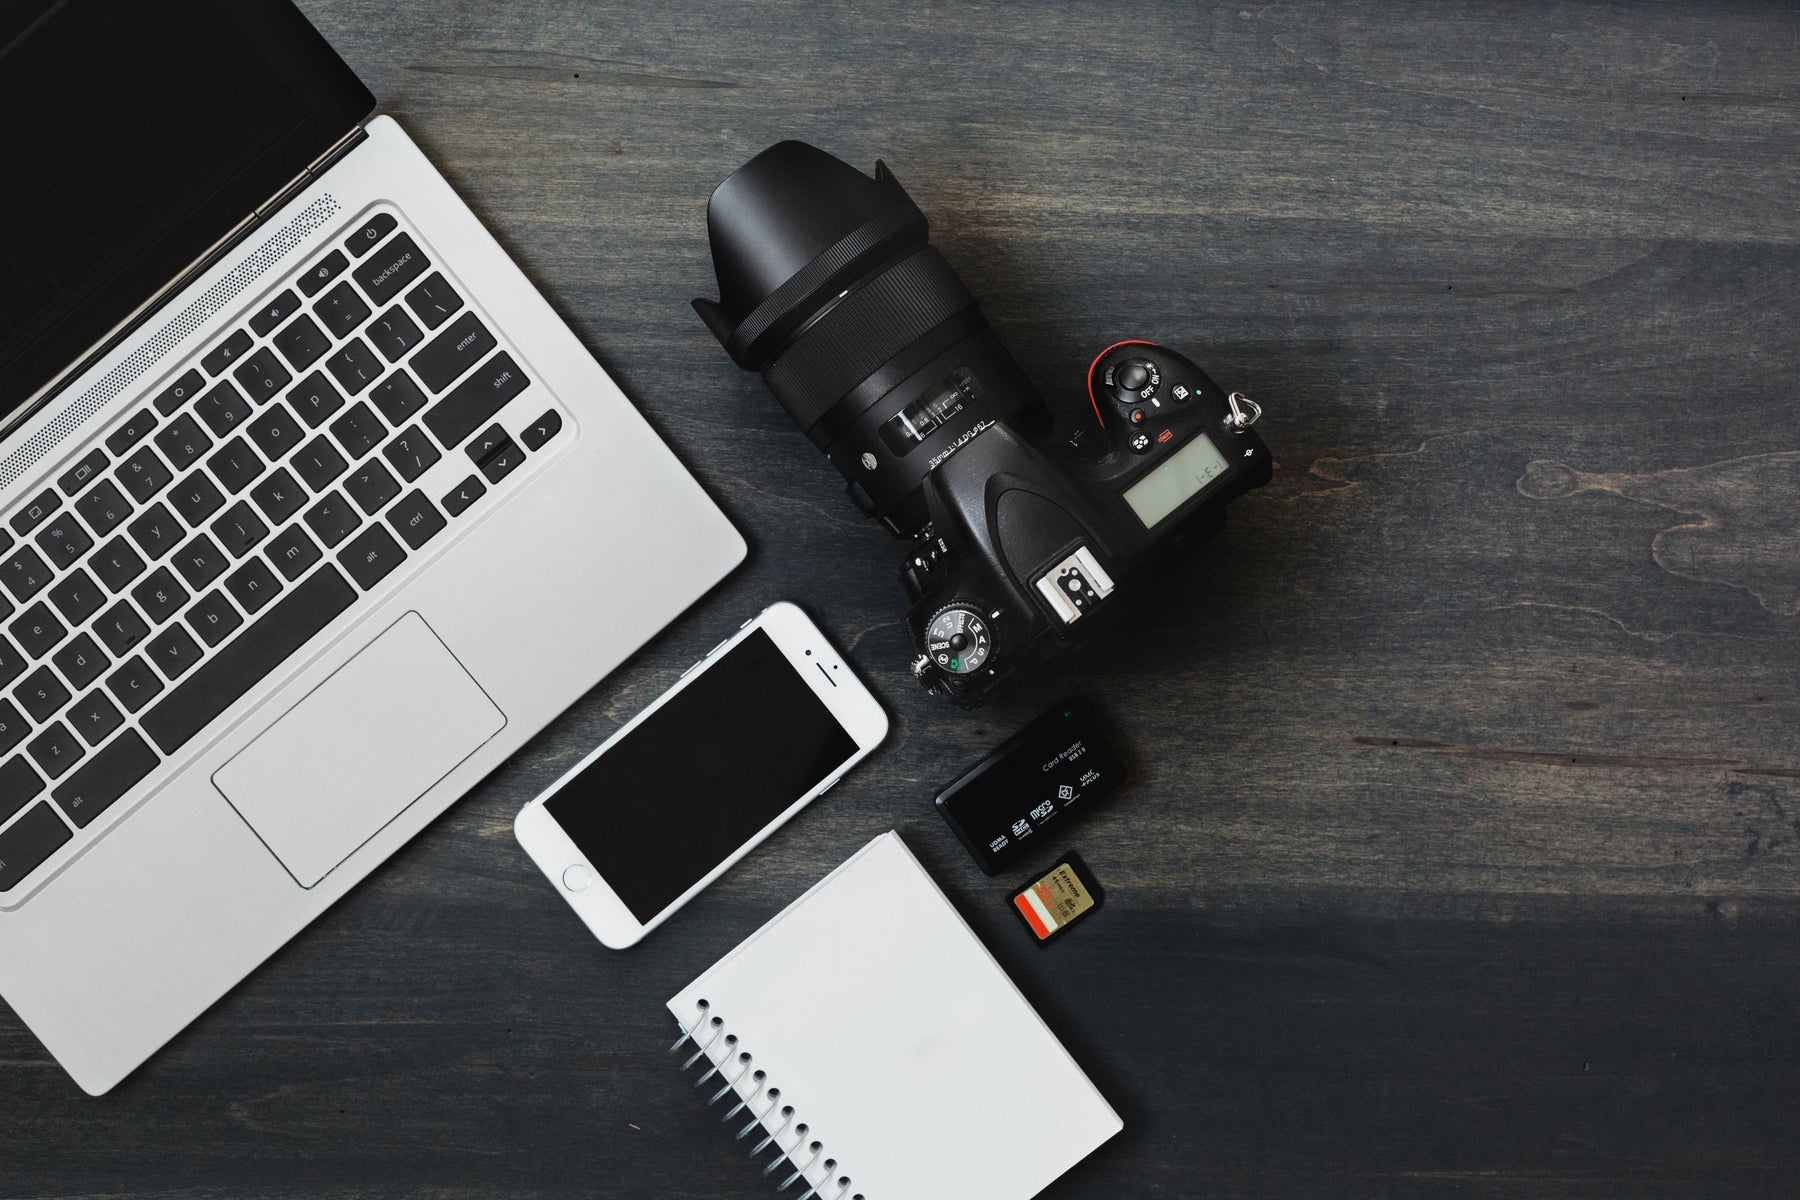 Quality Photos Are Key + Resources For Free Stock Photography